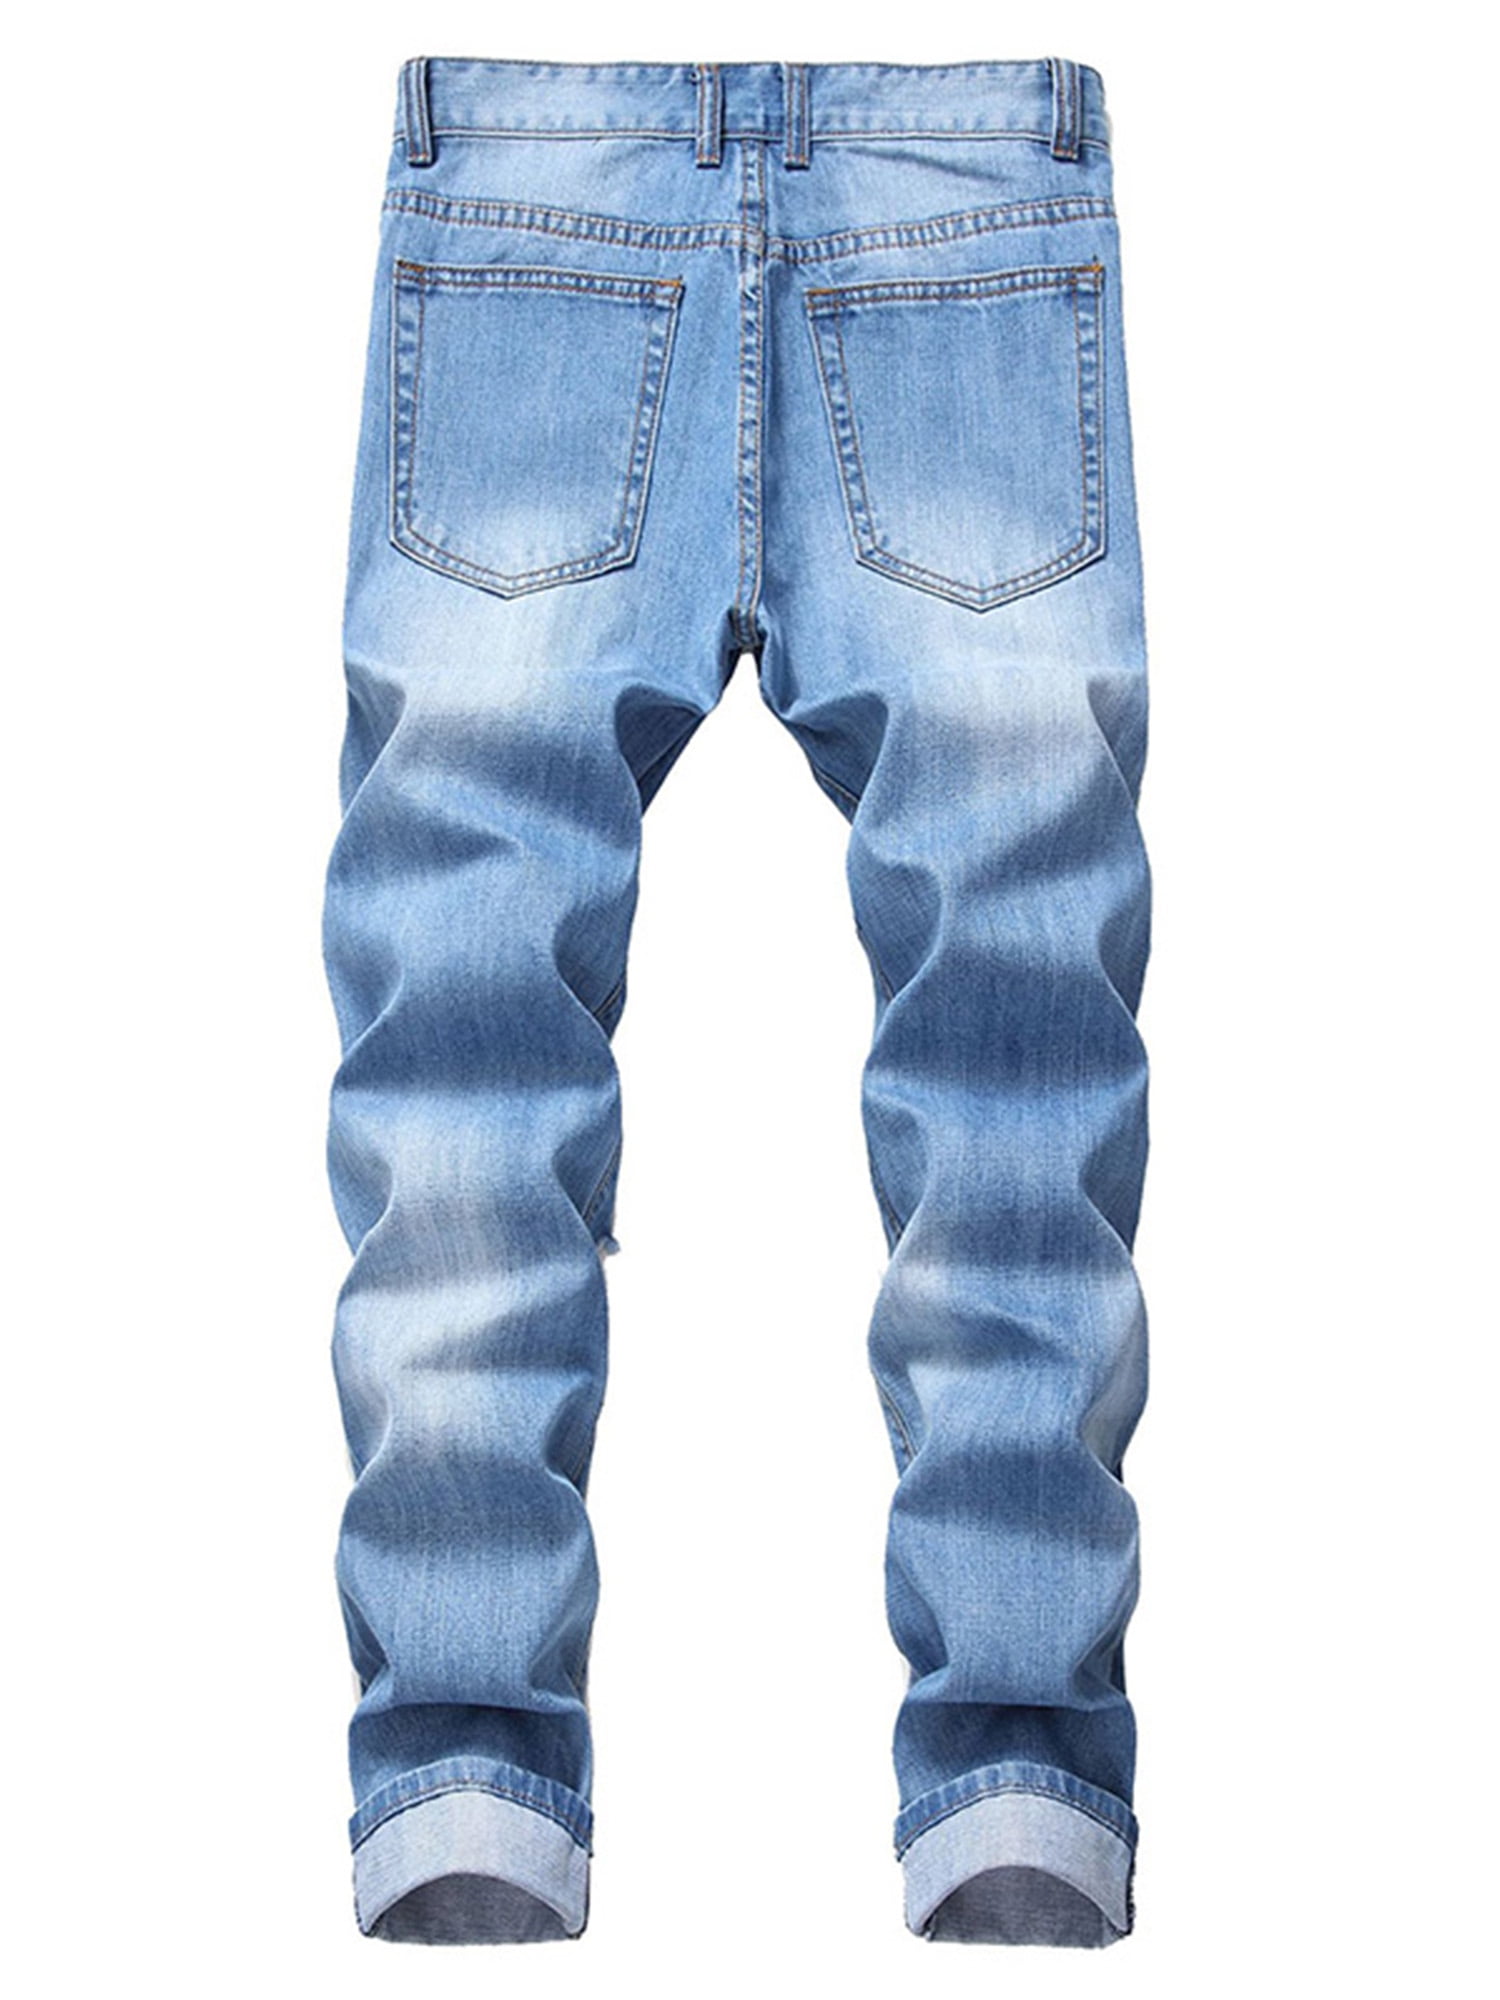 Details about   Men's skinny ripped jeans riders make old denim trousers stretch slim trousers